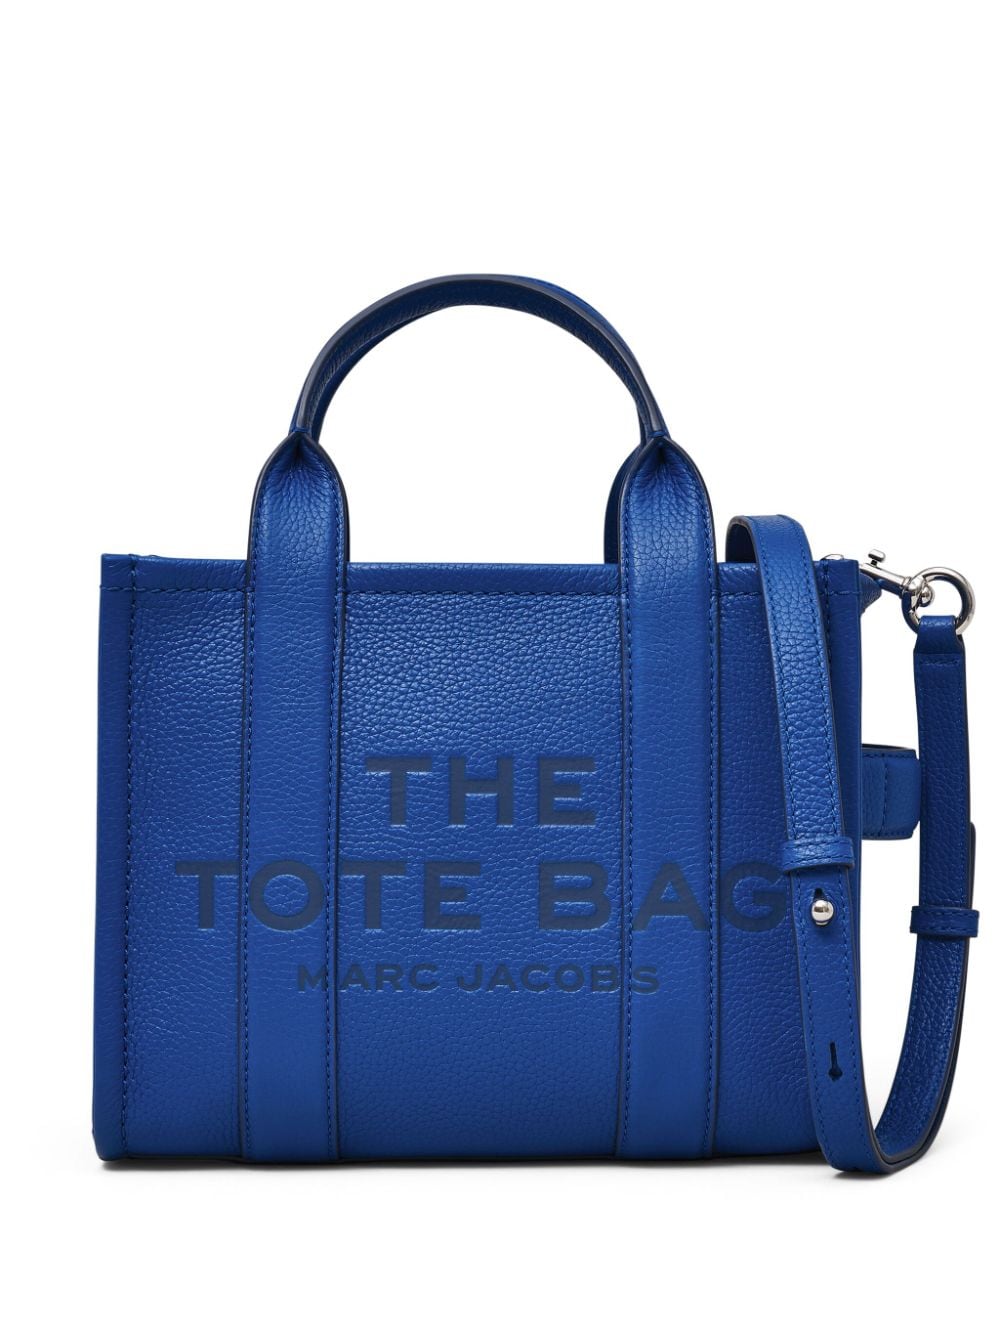 Marc Jacobs The Small leather tote bag - Blue von Marc Jacobs